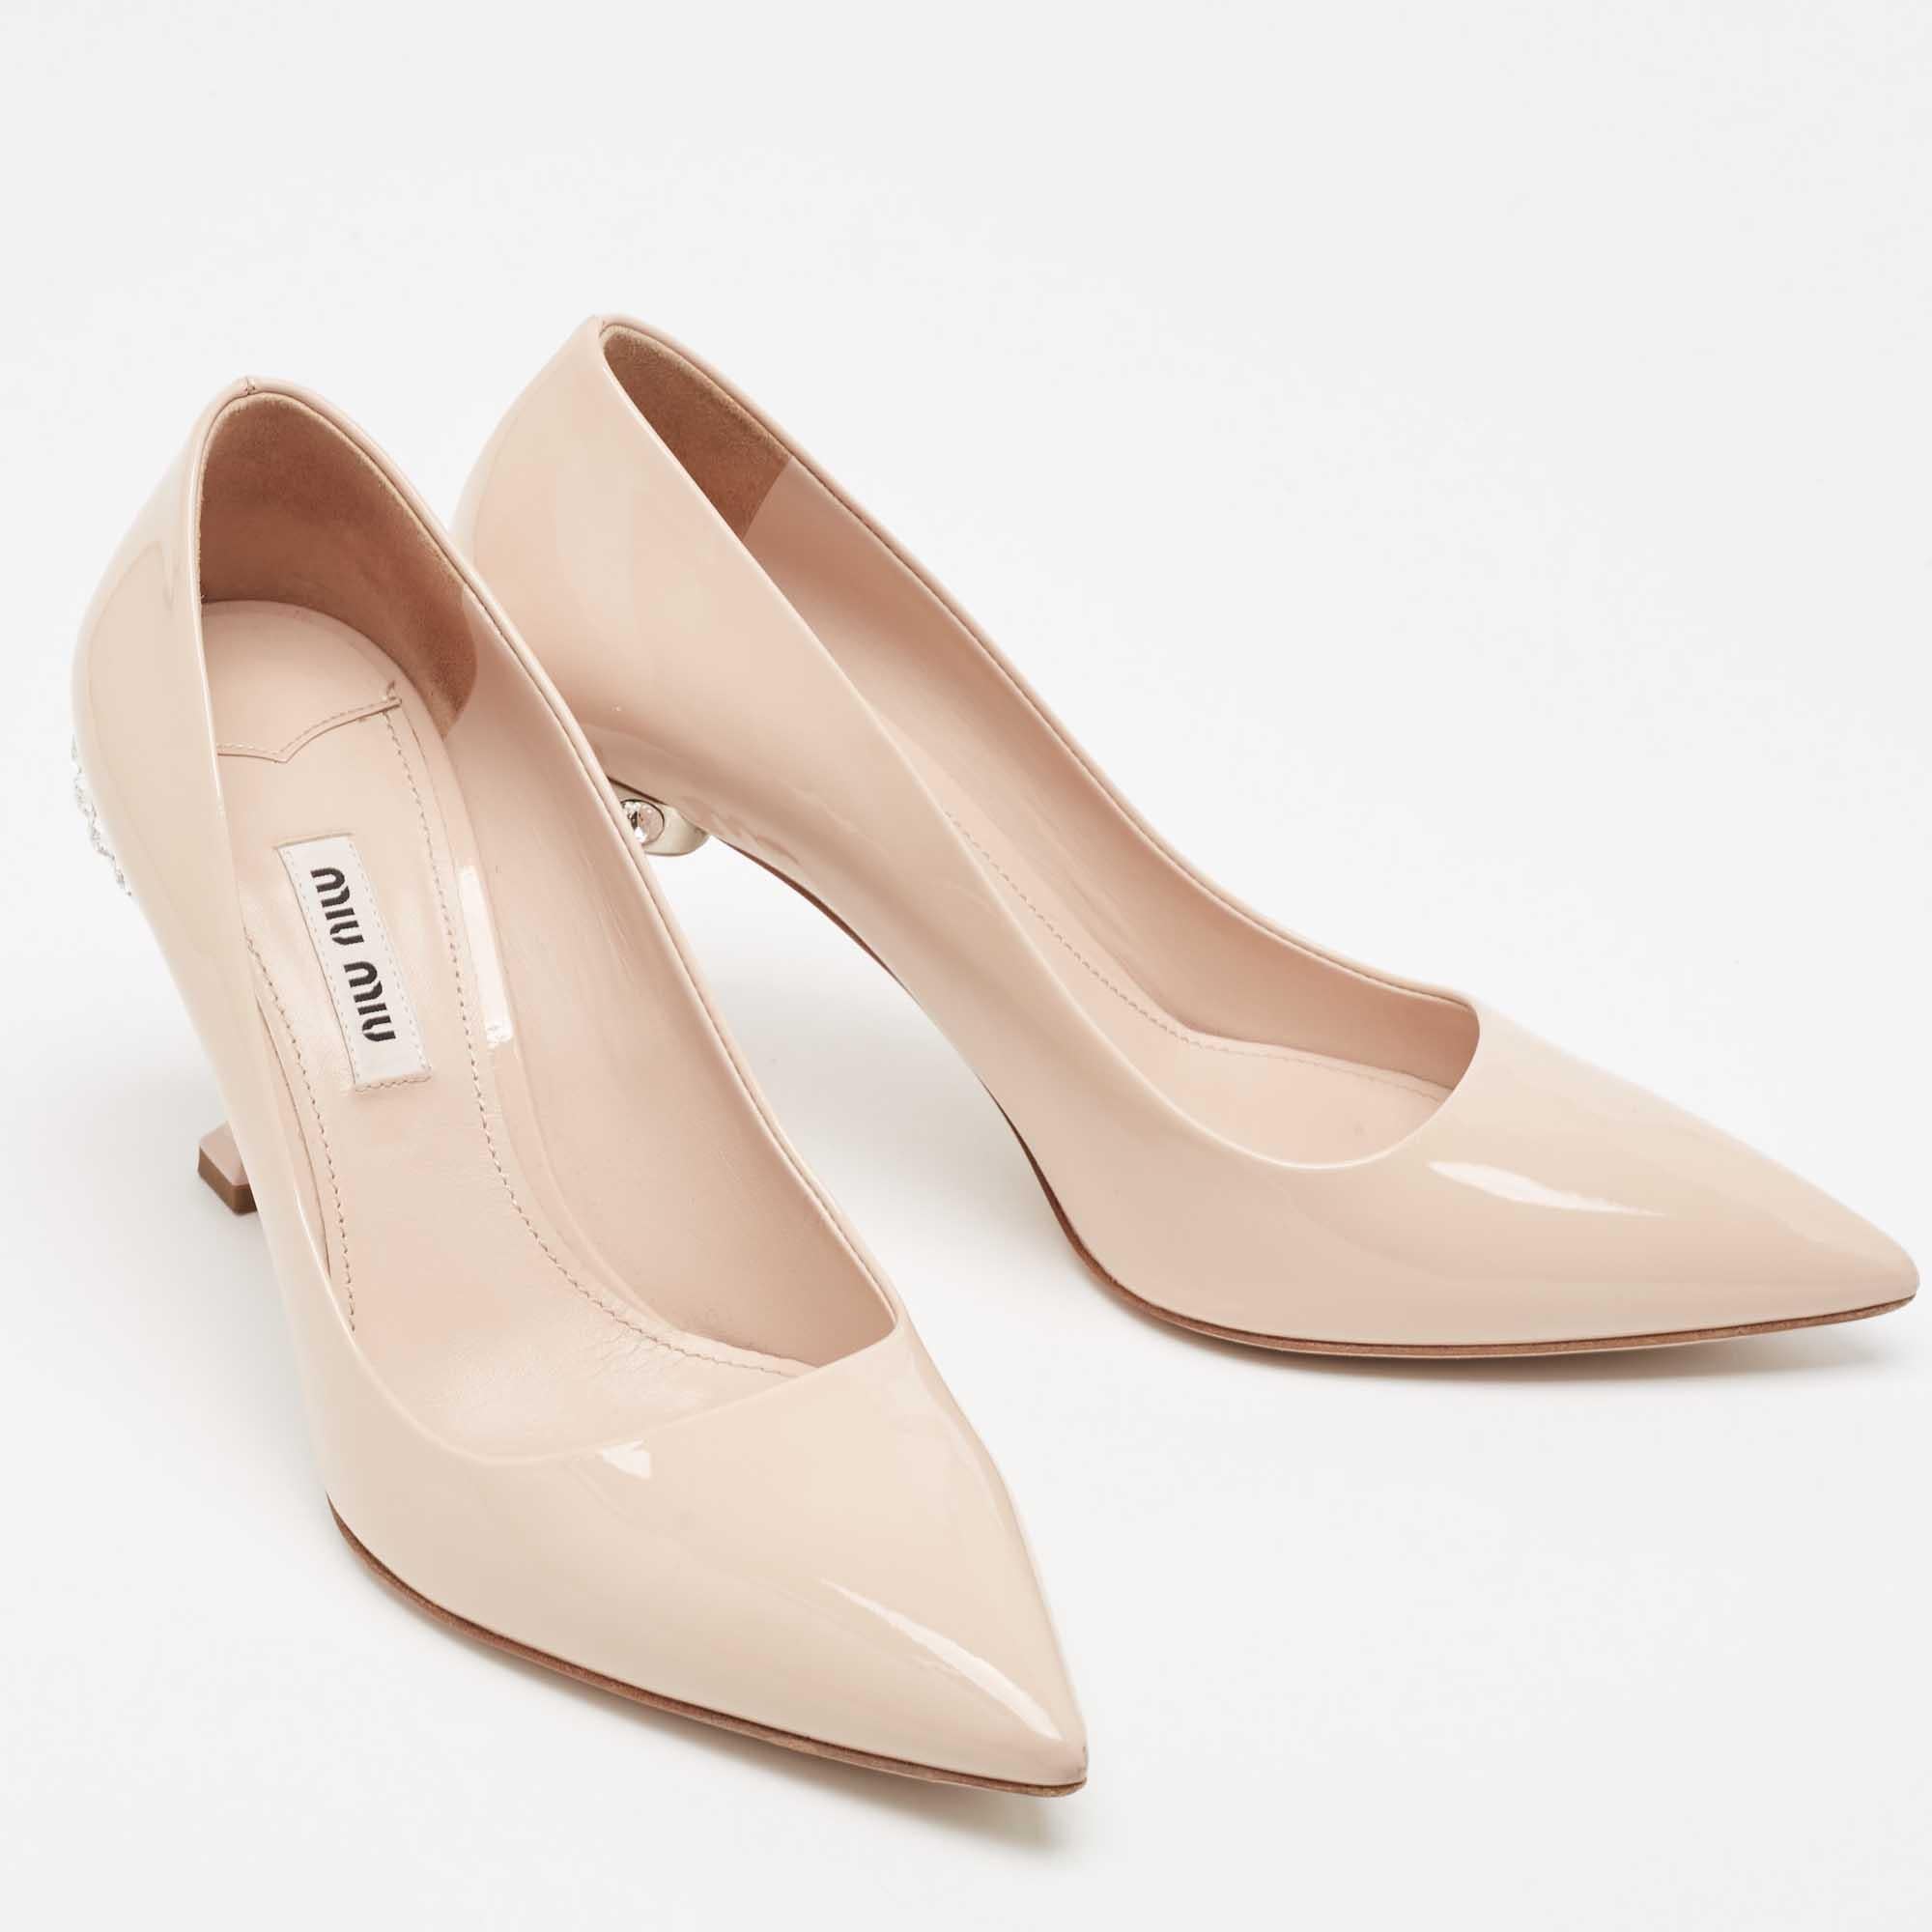 Miu Miu Beige Patent Leather Crystal Embellished Pointed Toe Pumps Size 37 In Good Condition For Sale In Dubai, Al Qouz 2